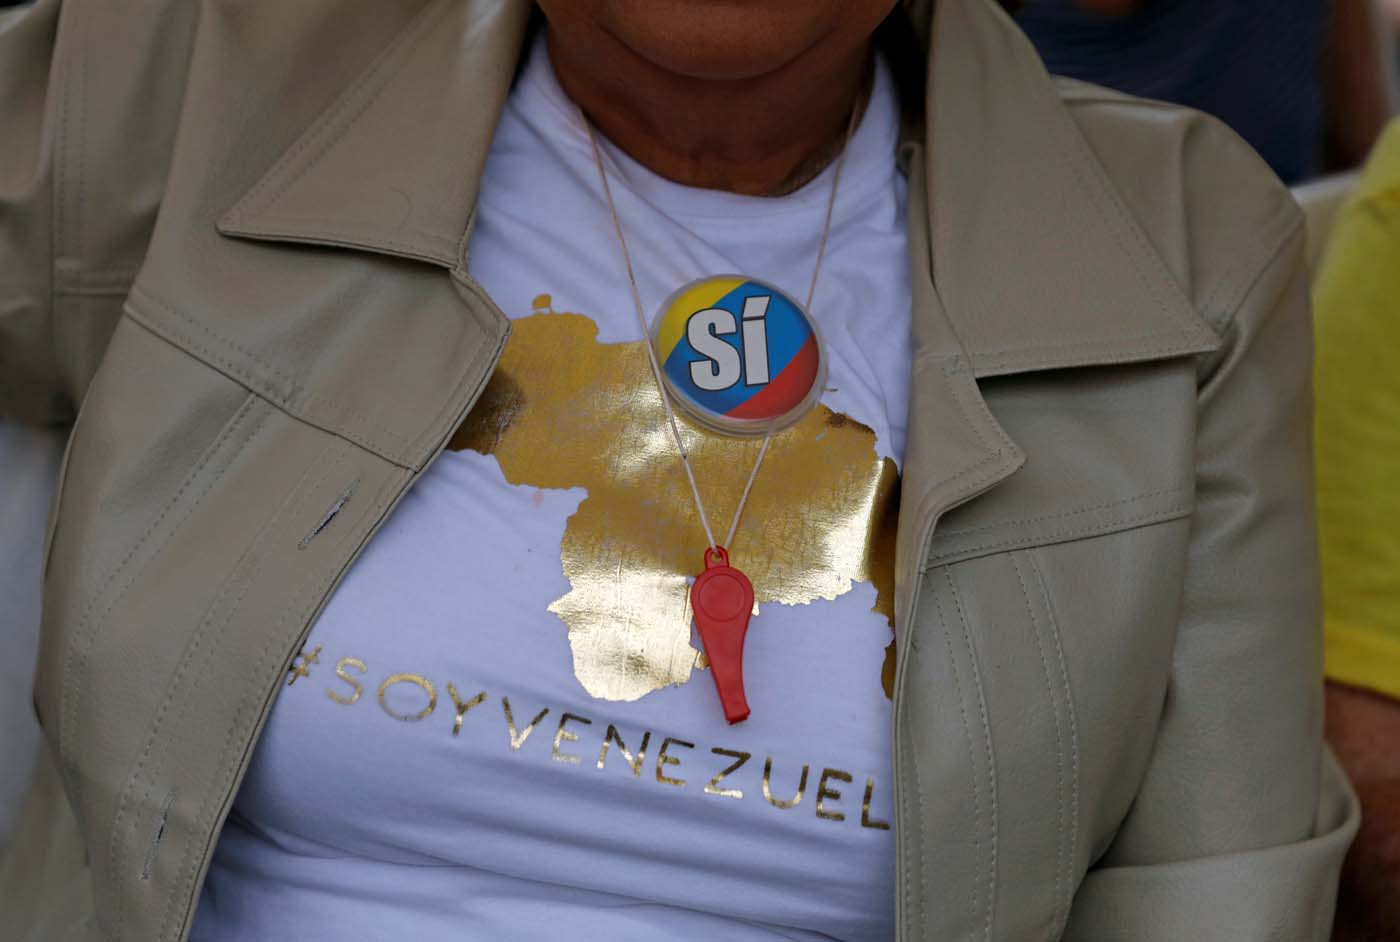 A woman wears a pin in the national colours reading "Yes" at a polling station during an unofficial plebiscite against Venezuela's President Nicolas Maduro's government and his plan to rewrite the constitution, in Caracas, Venezuela July 16, 2017. The writing on the T-shirt reads: "#I am Venezuela." REUTERS/Andres Martinez Casares